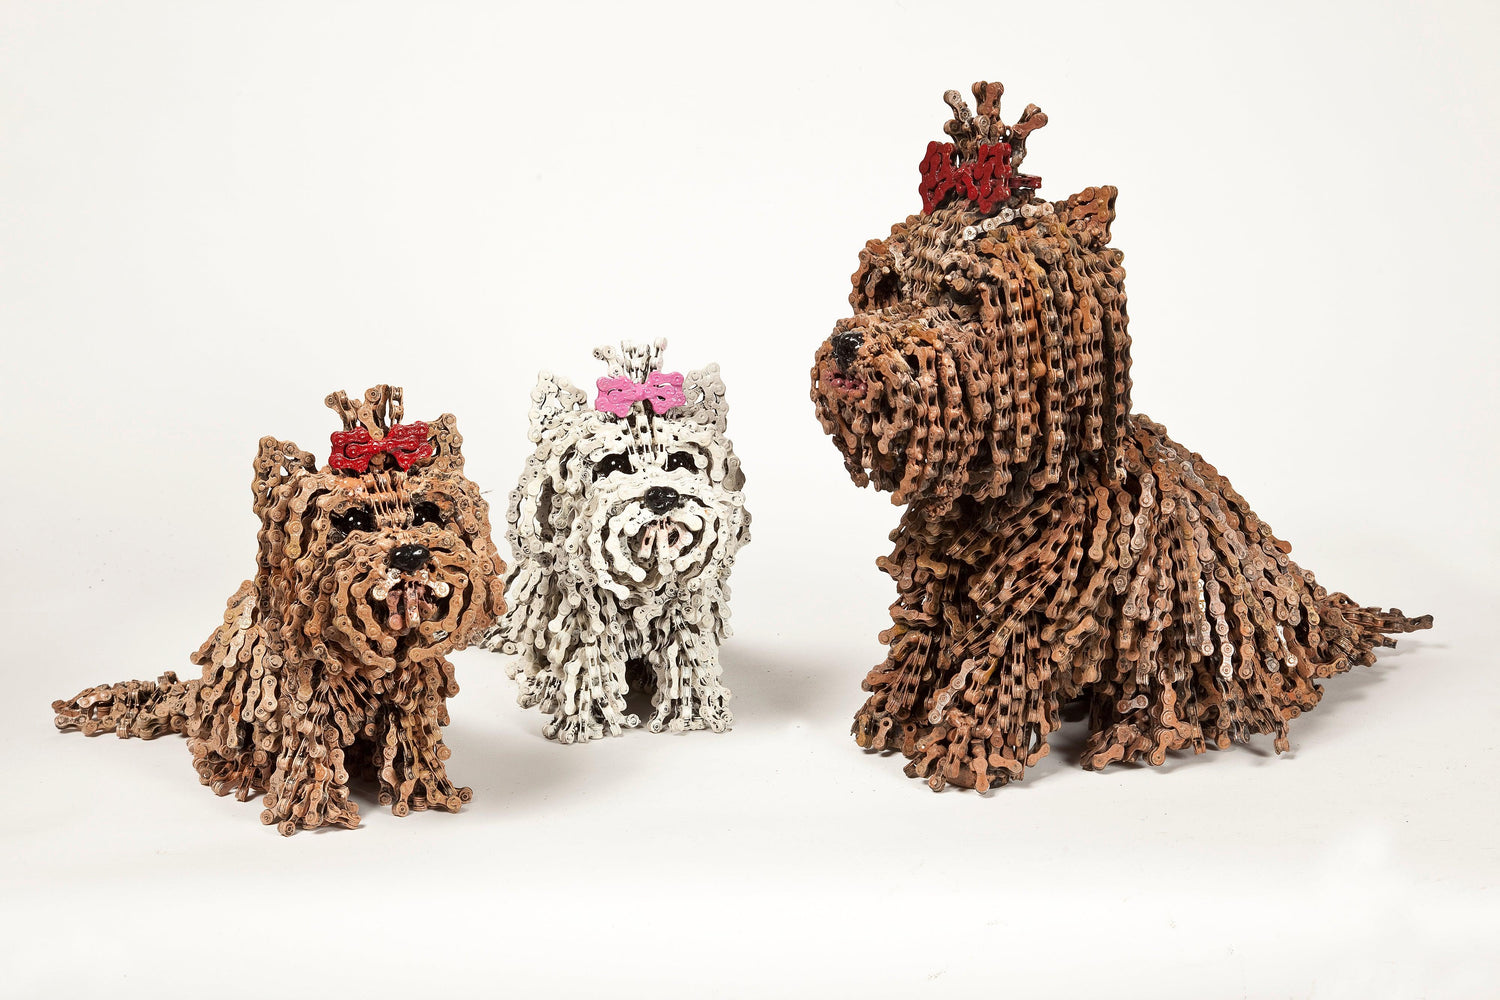 Baby Choo - dog sculpture, made of bicycle chains | UNCHAINED by NIRIT LEVAV PACKER